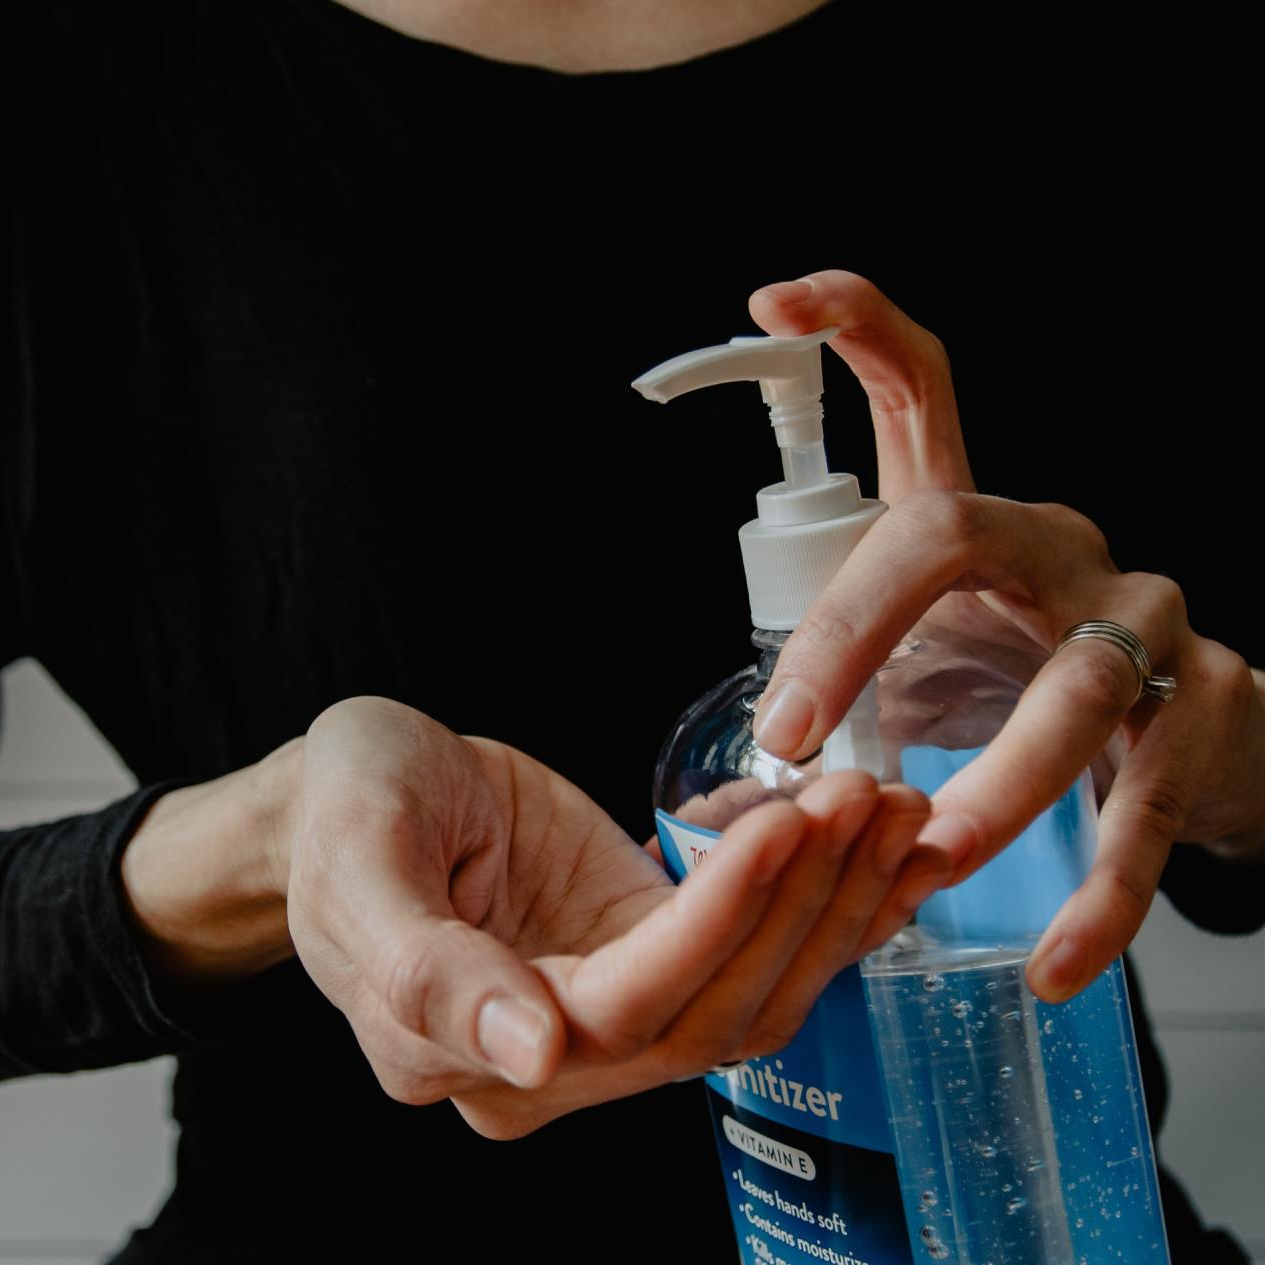 A woman is holding a bottle of hand sanitizer in her hands